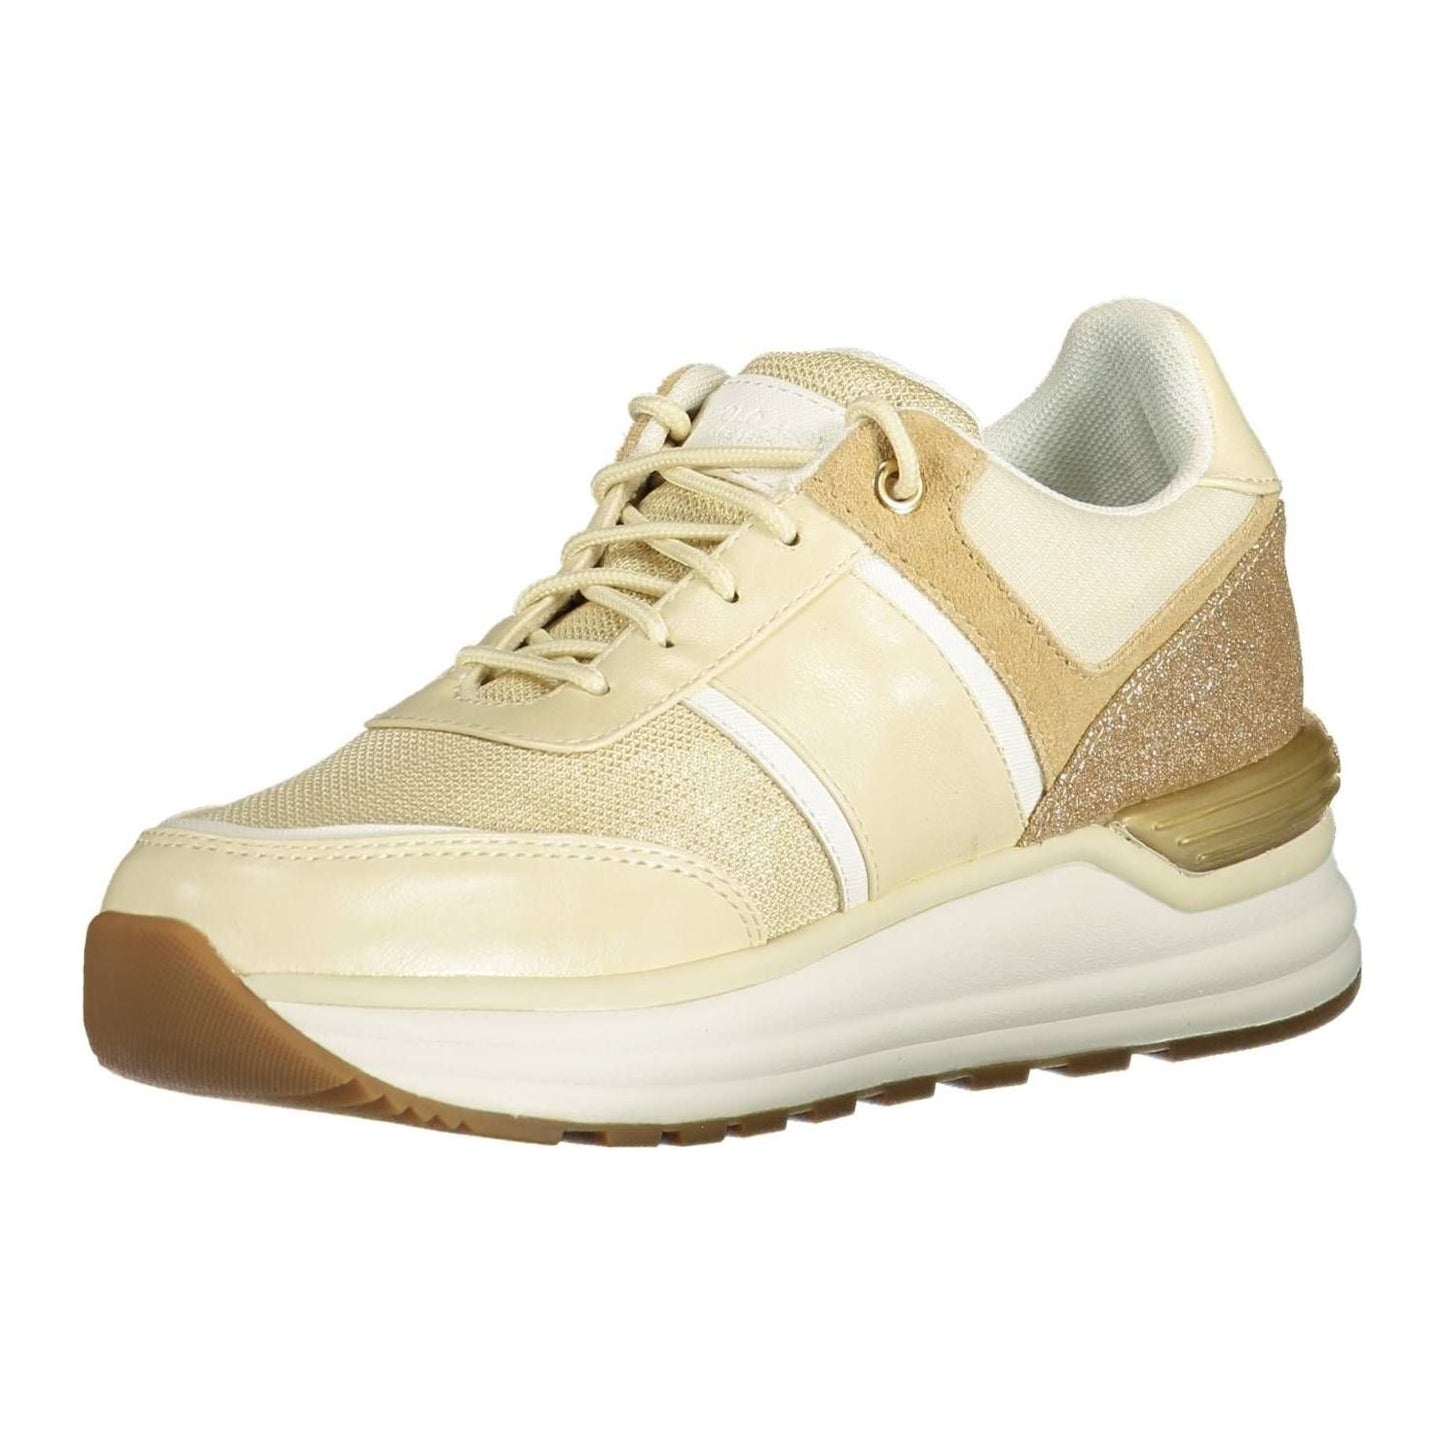 U.S. POLO ASSN. | Beige ECO SUEDE Lace-up Sneakers| McRichard Designer Brands   